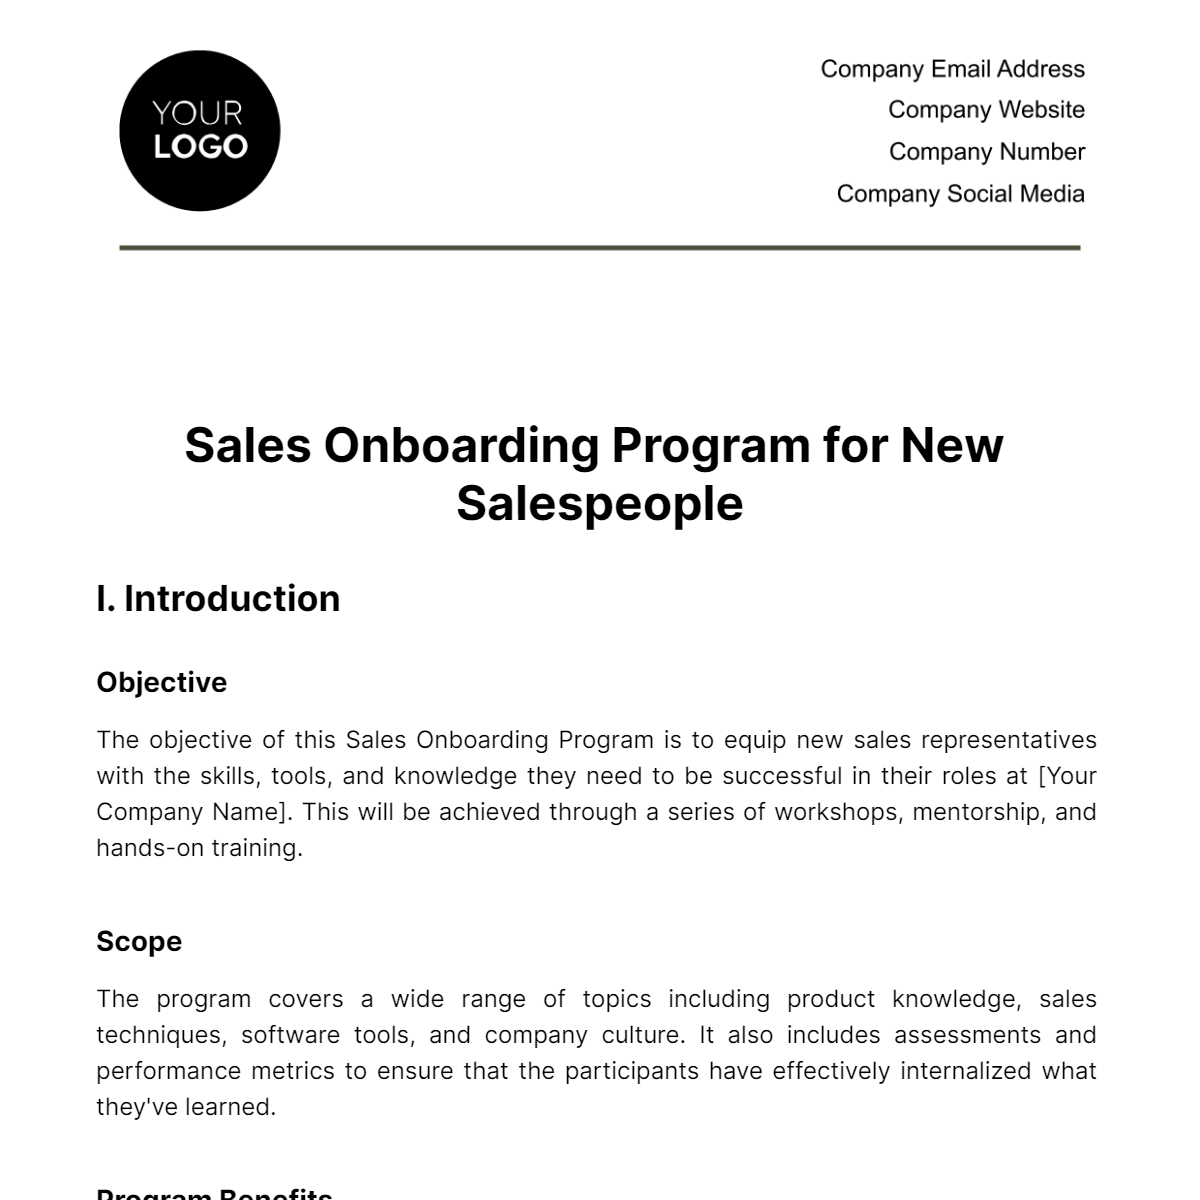 Free Sales Onboarding Program for New Salespeople Template